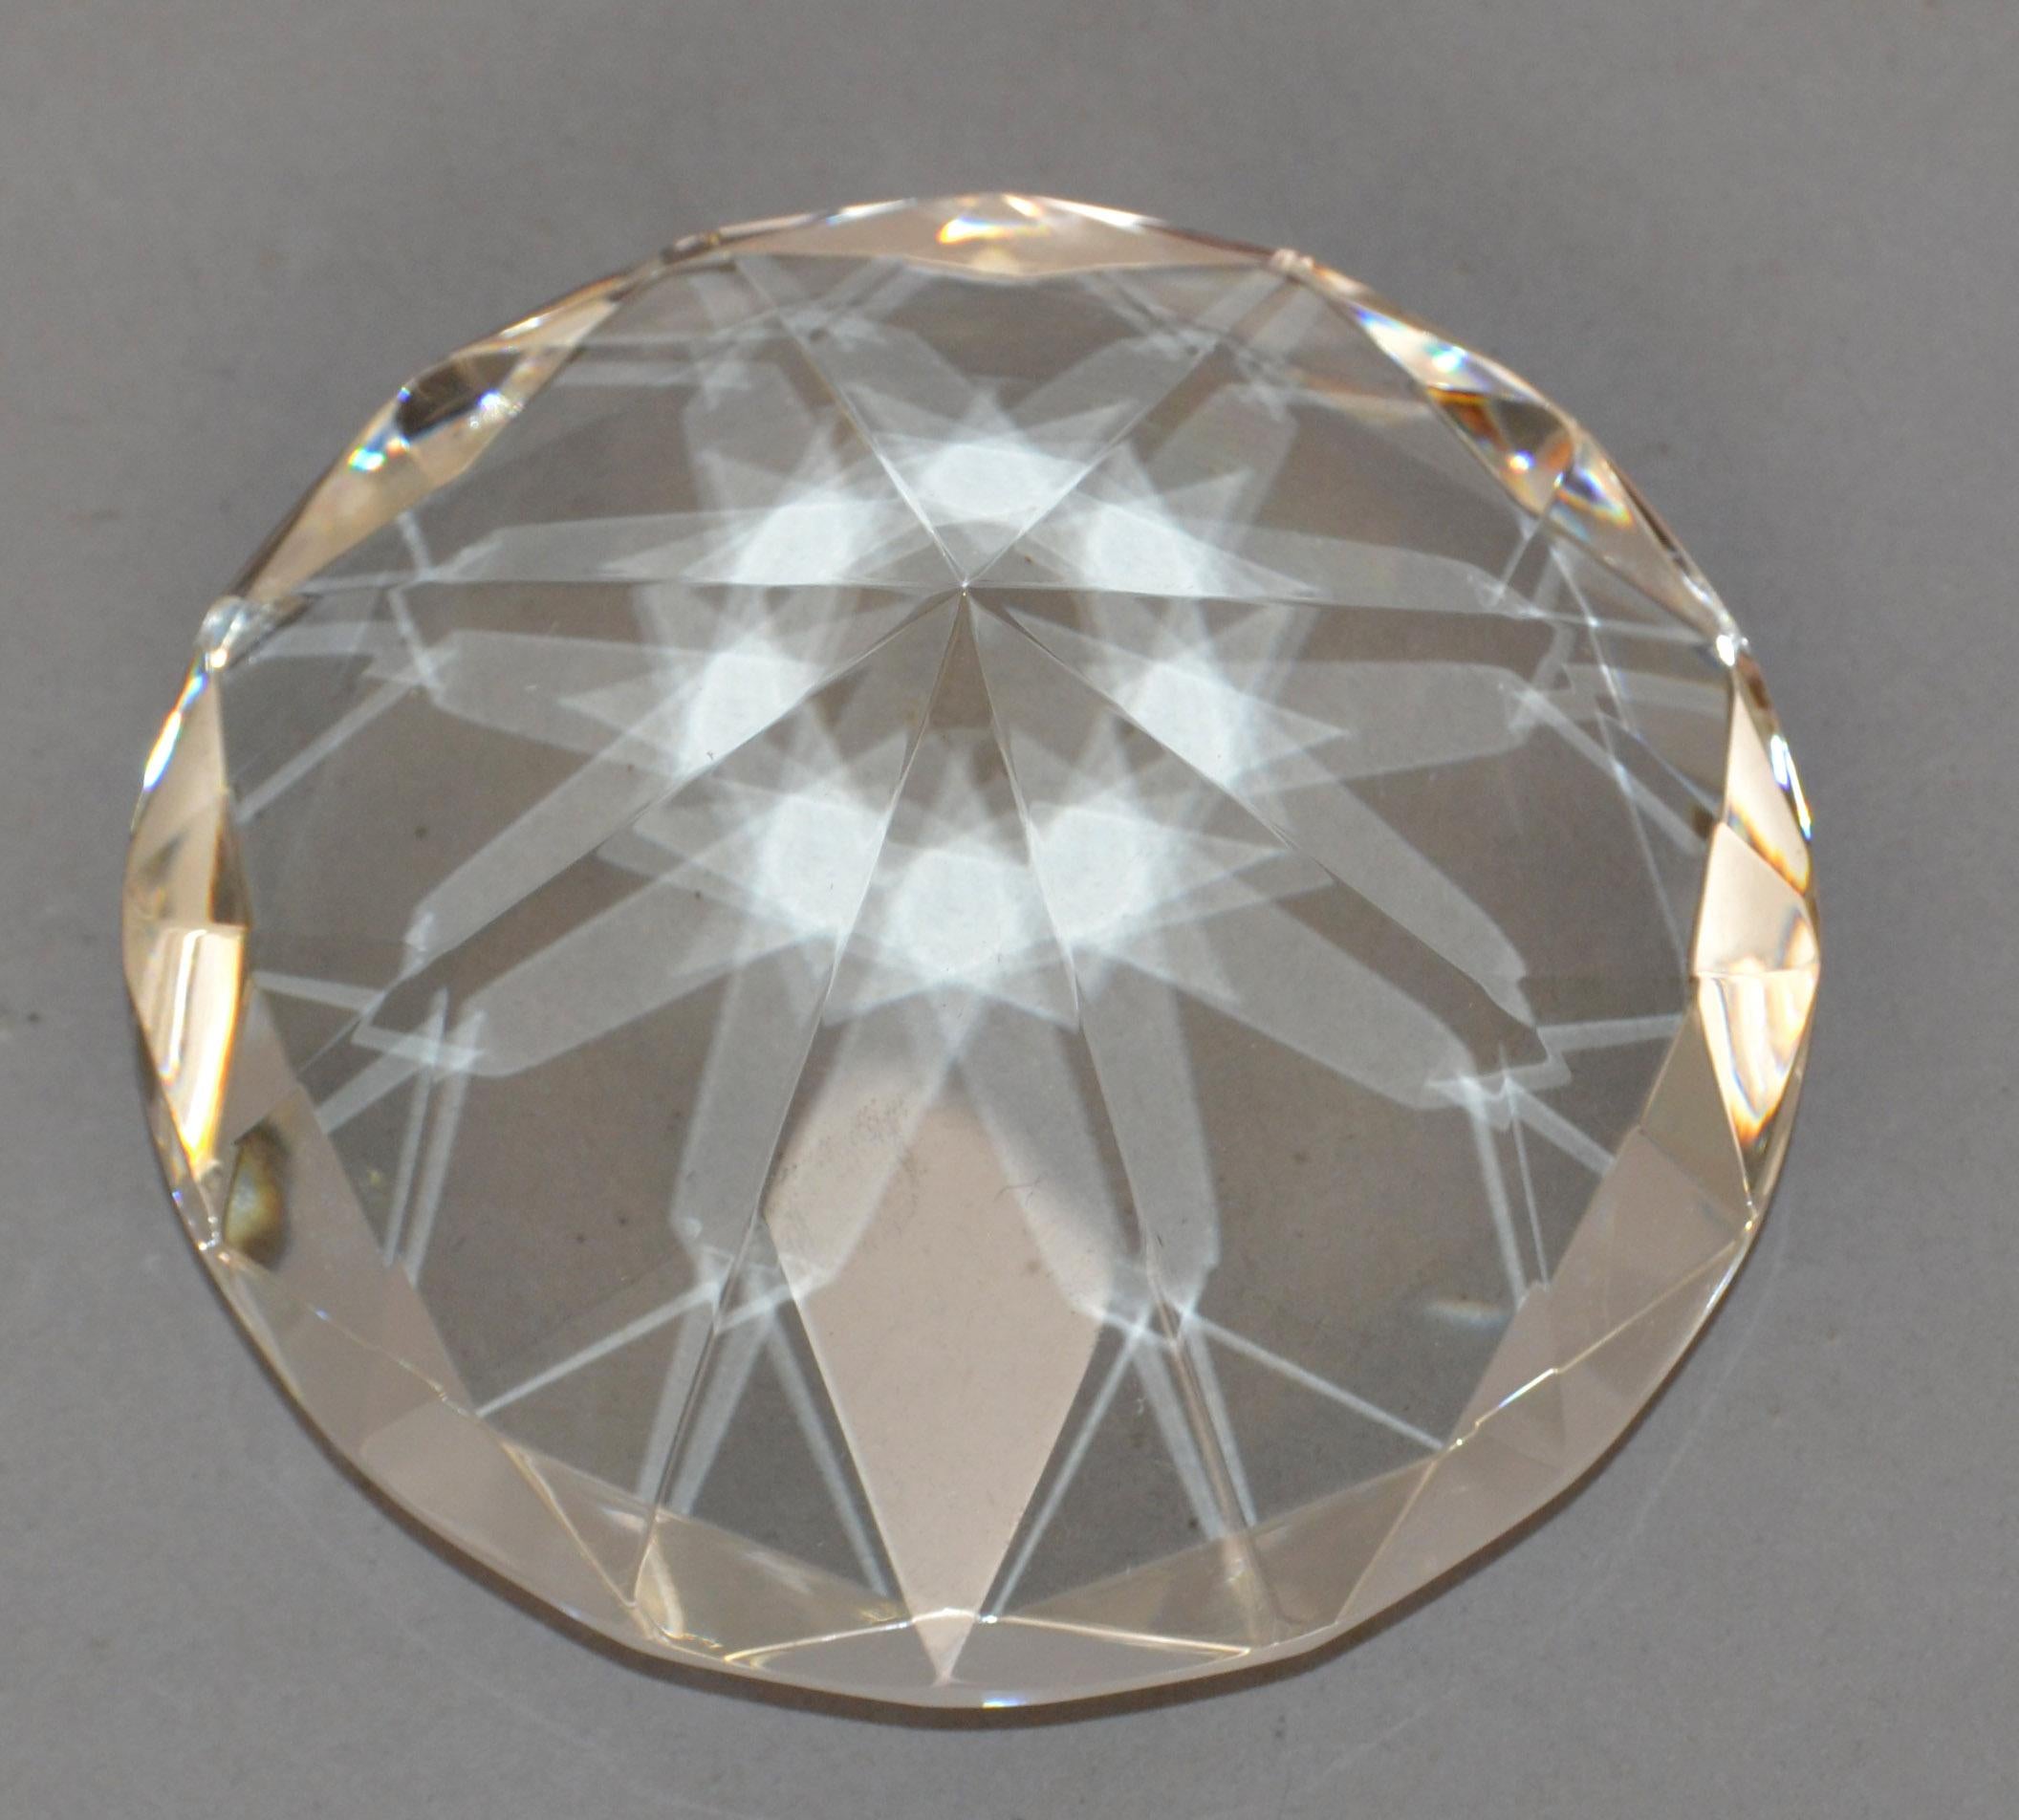 One Mid-Century Modern faceted glass diamond shaped magnifying paperweight, Figurine, Sculpture or Desk accessory. In good condition no chips, light scratches to the faceted glass.